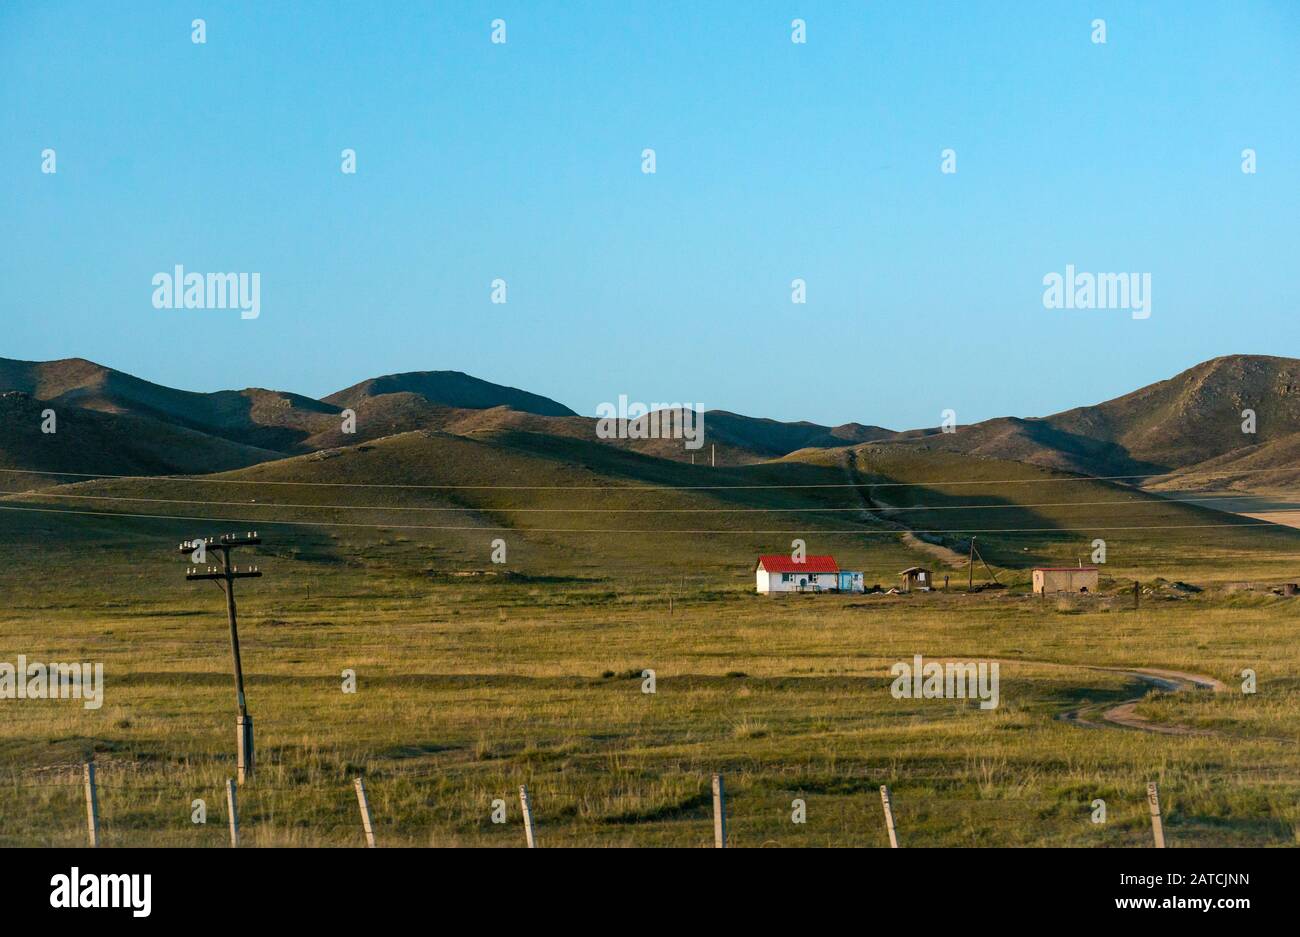 Hills and grassland seen from Trans-Mongolian Express train, Mongolia, Asia Stock Photo